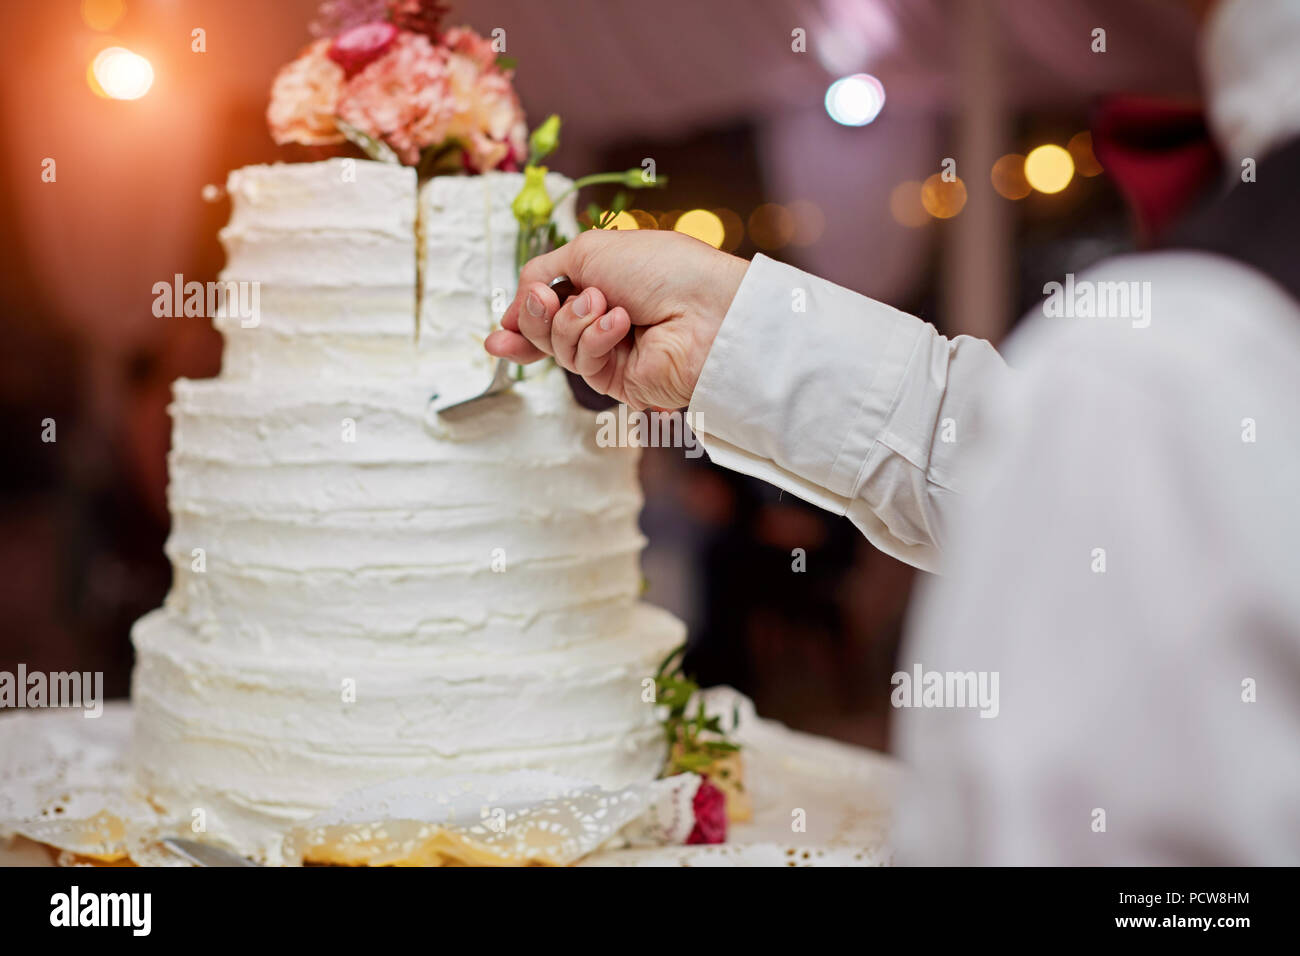 bride and a groom is cutting their wedding cake. beautiful cake. nicel light. wedding concept Stock Photo